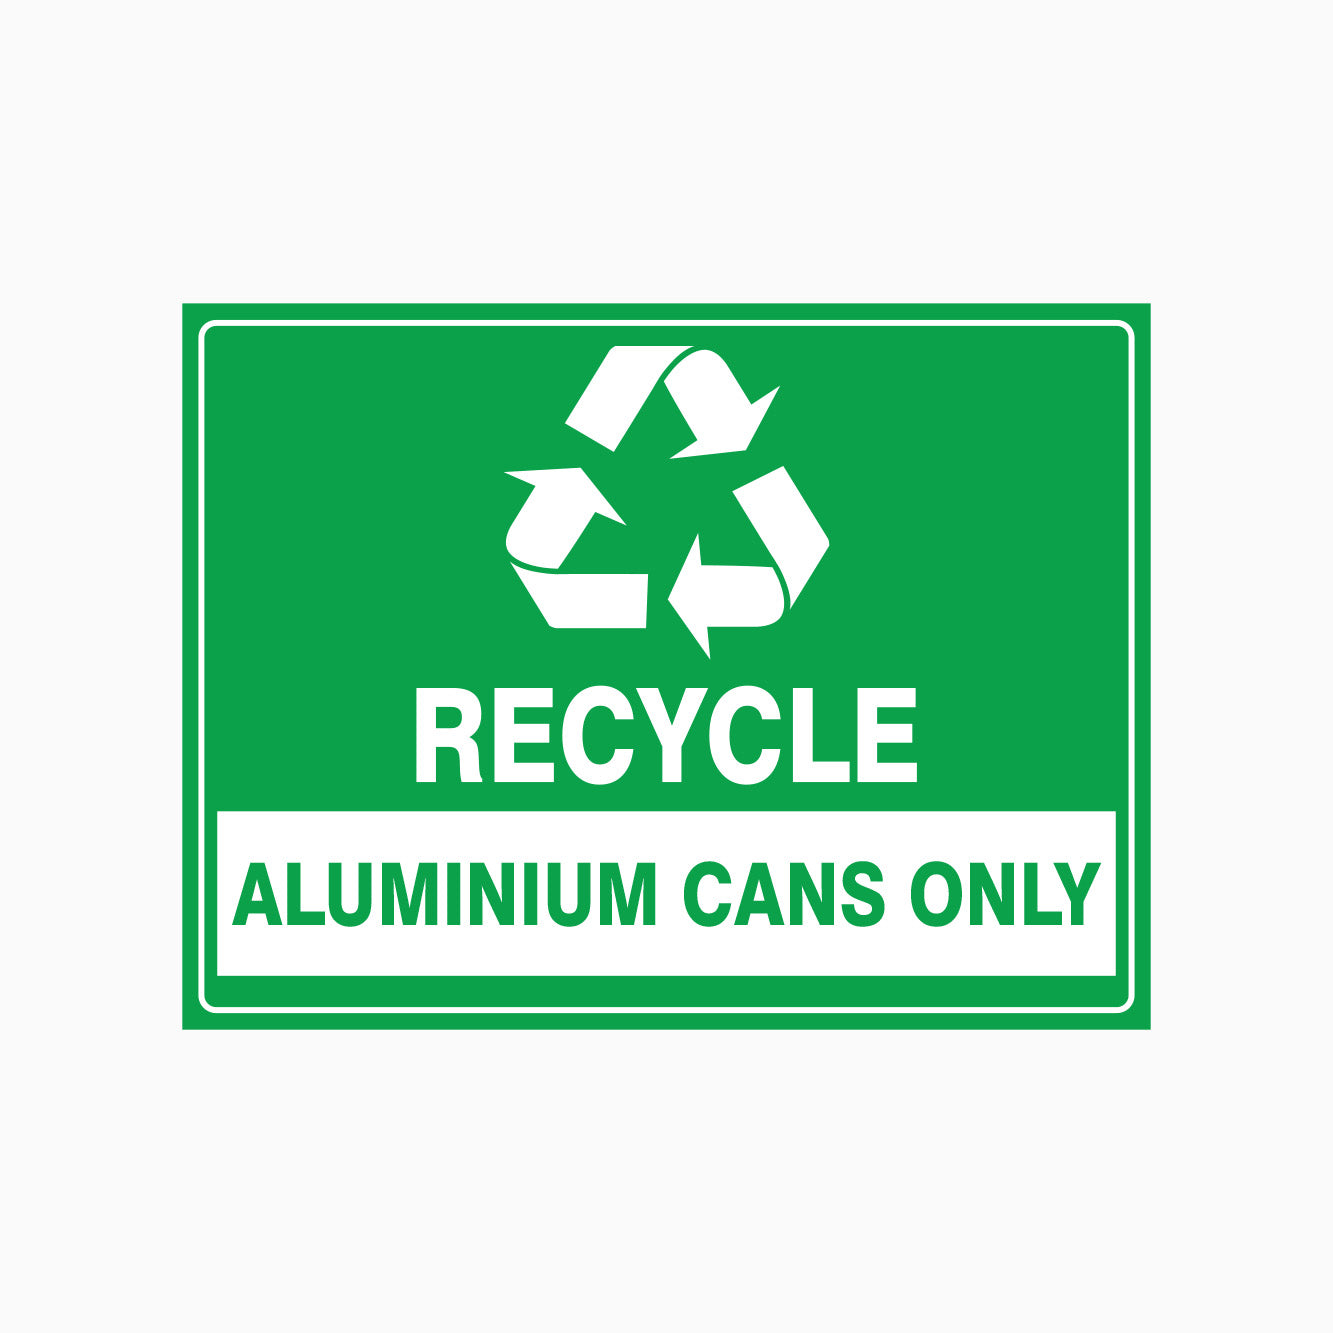 RECYCLE SIGN - ALUMINIUM CANS ONLY SIGN